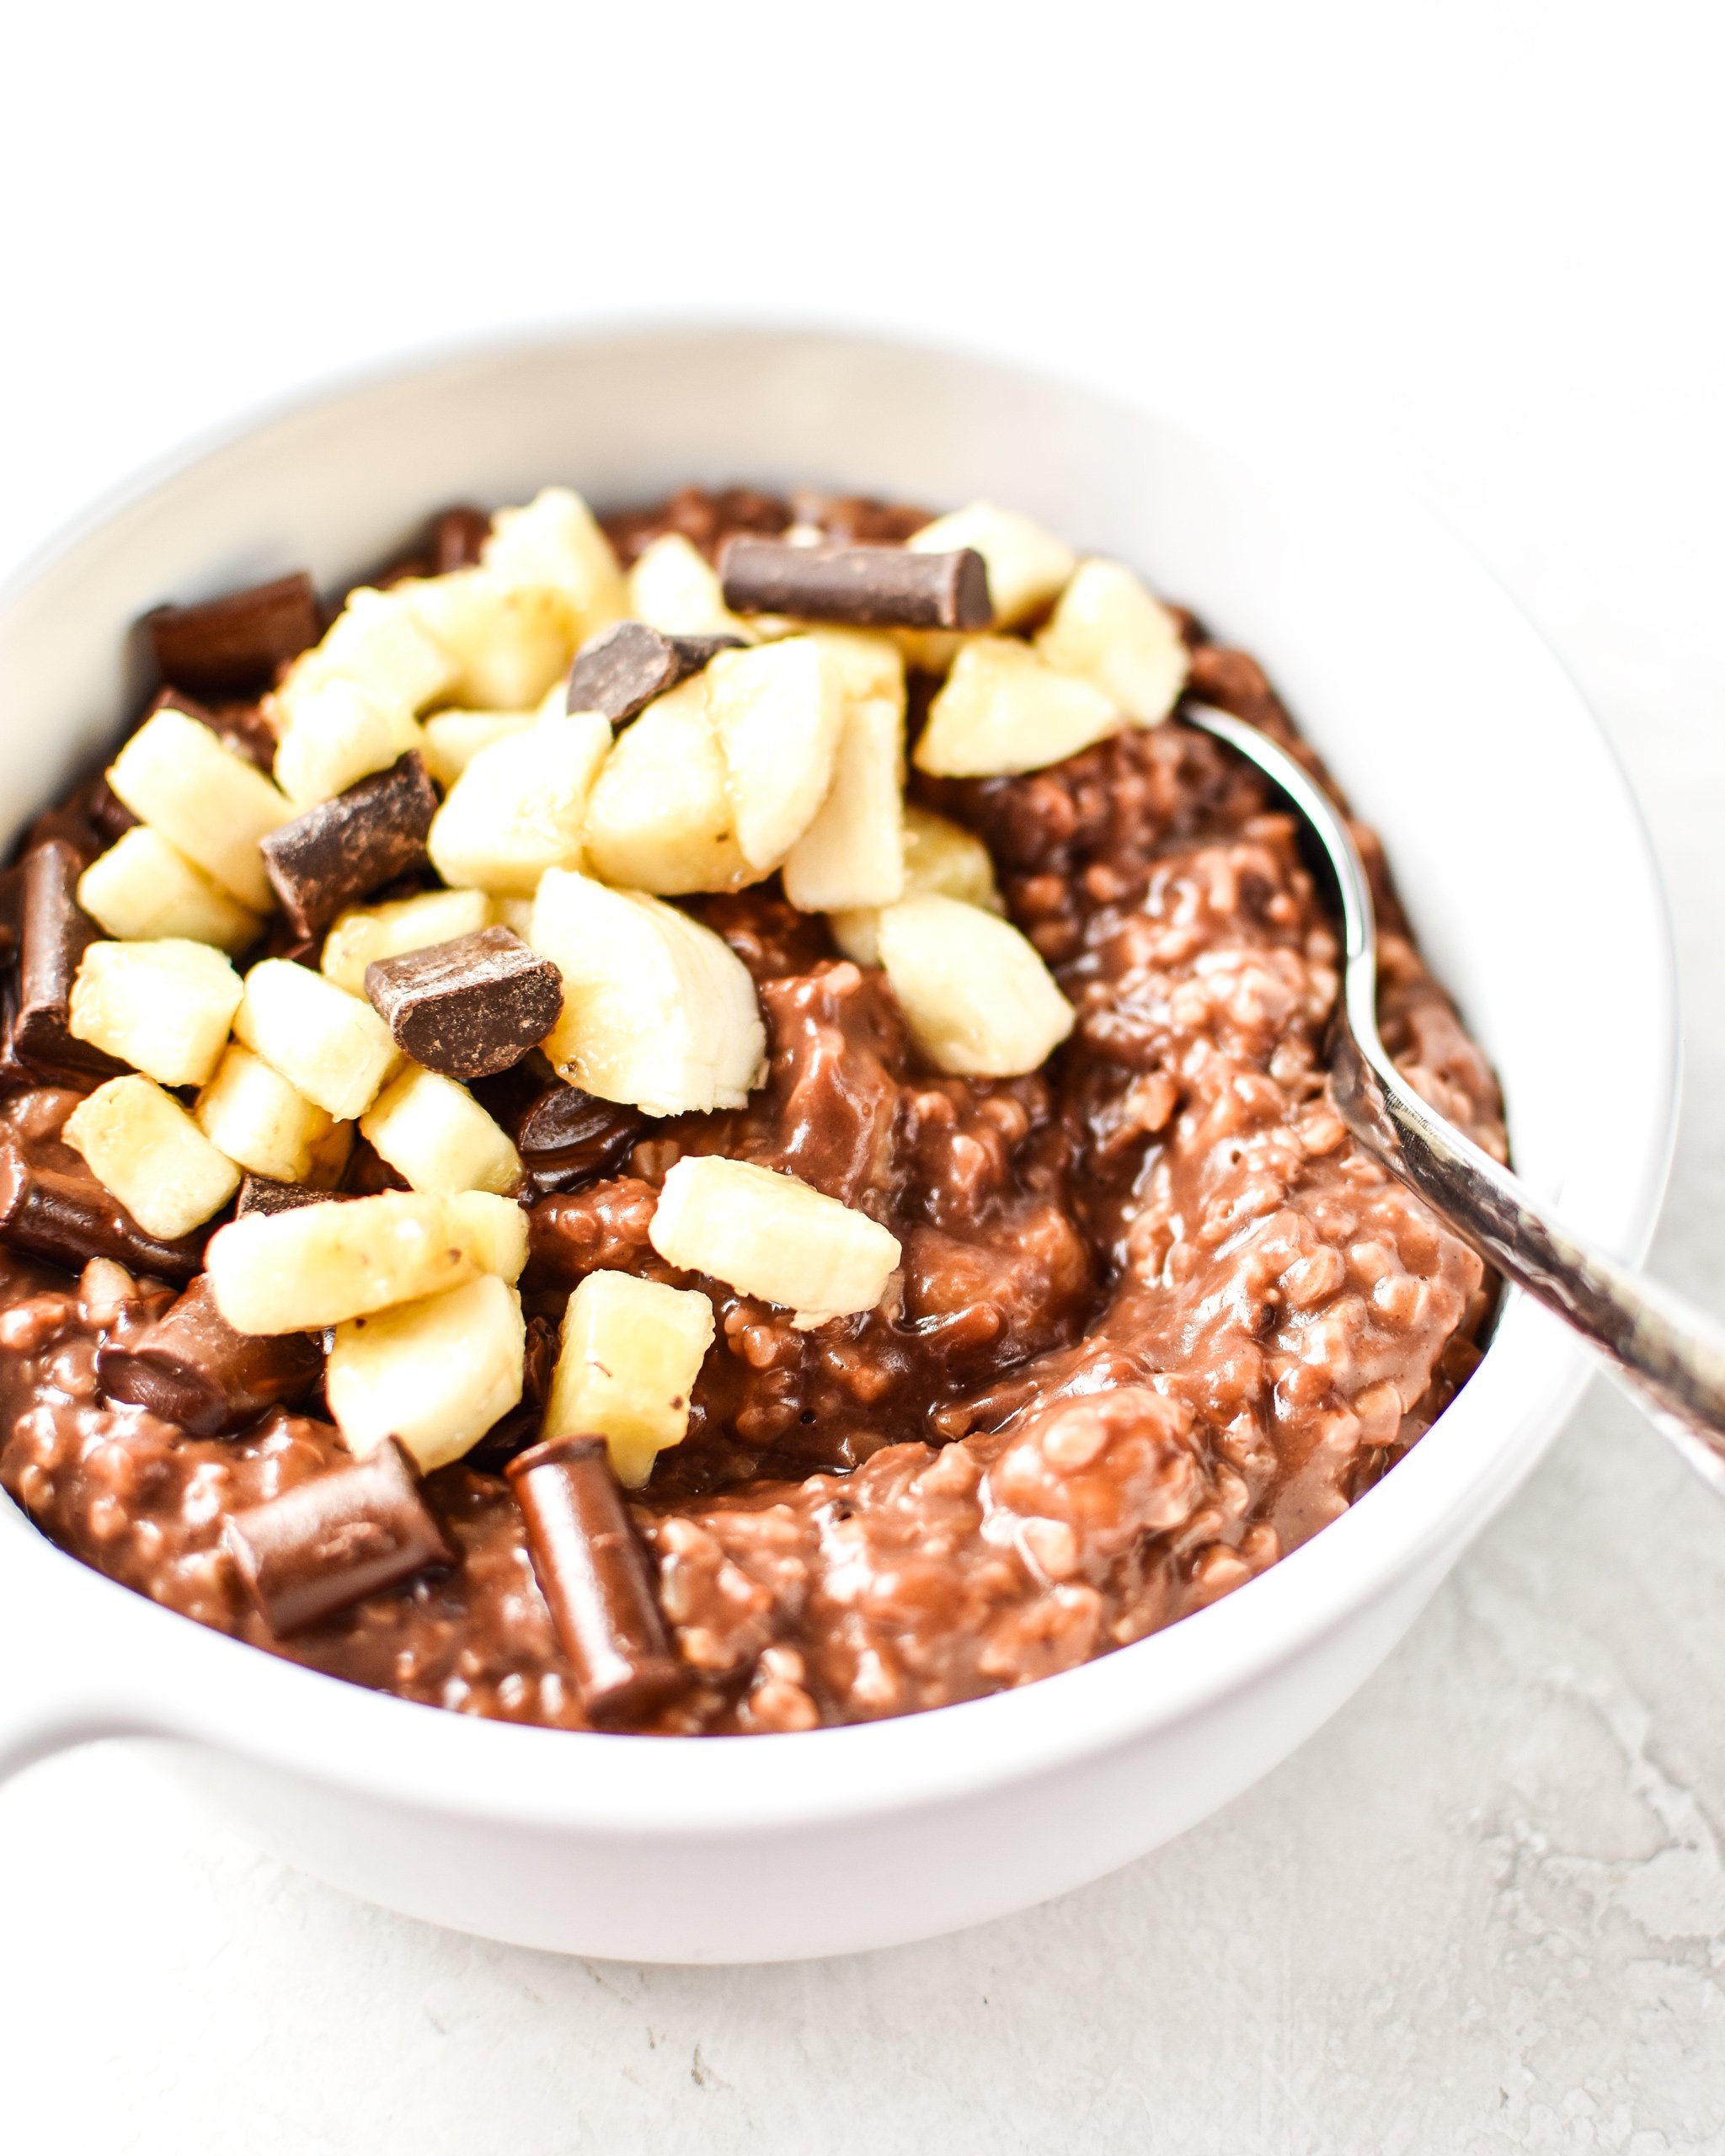 a bowl of chocolate banana steel cut oats made on the stovetop, topped with banana and chocolate chunks